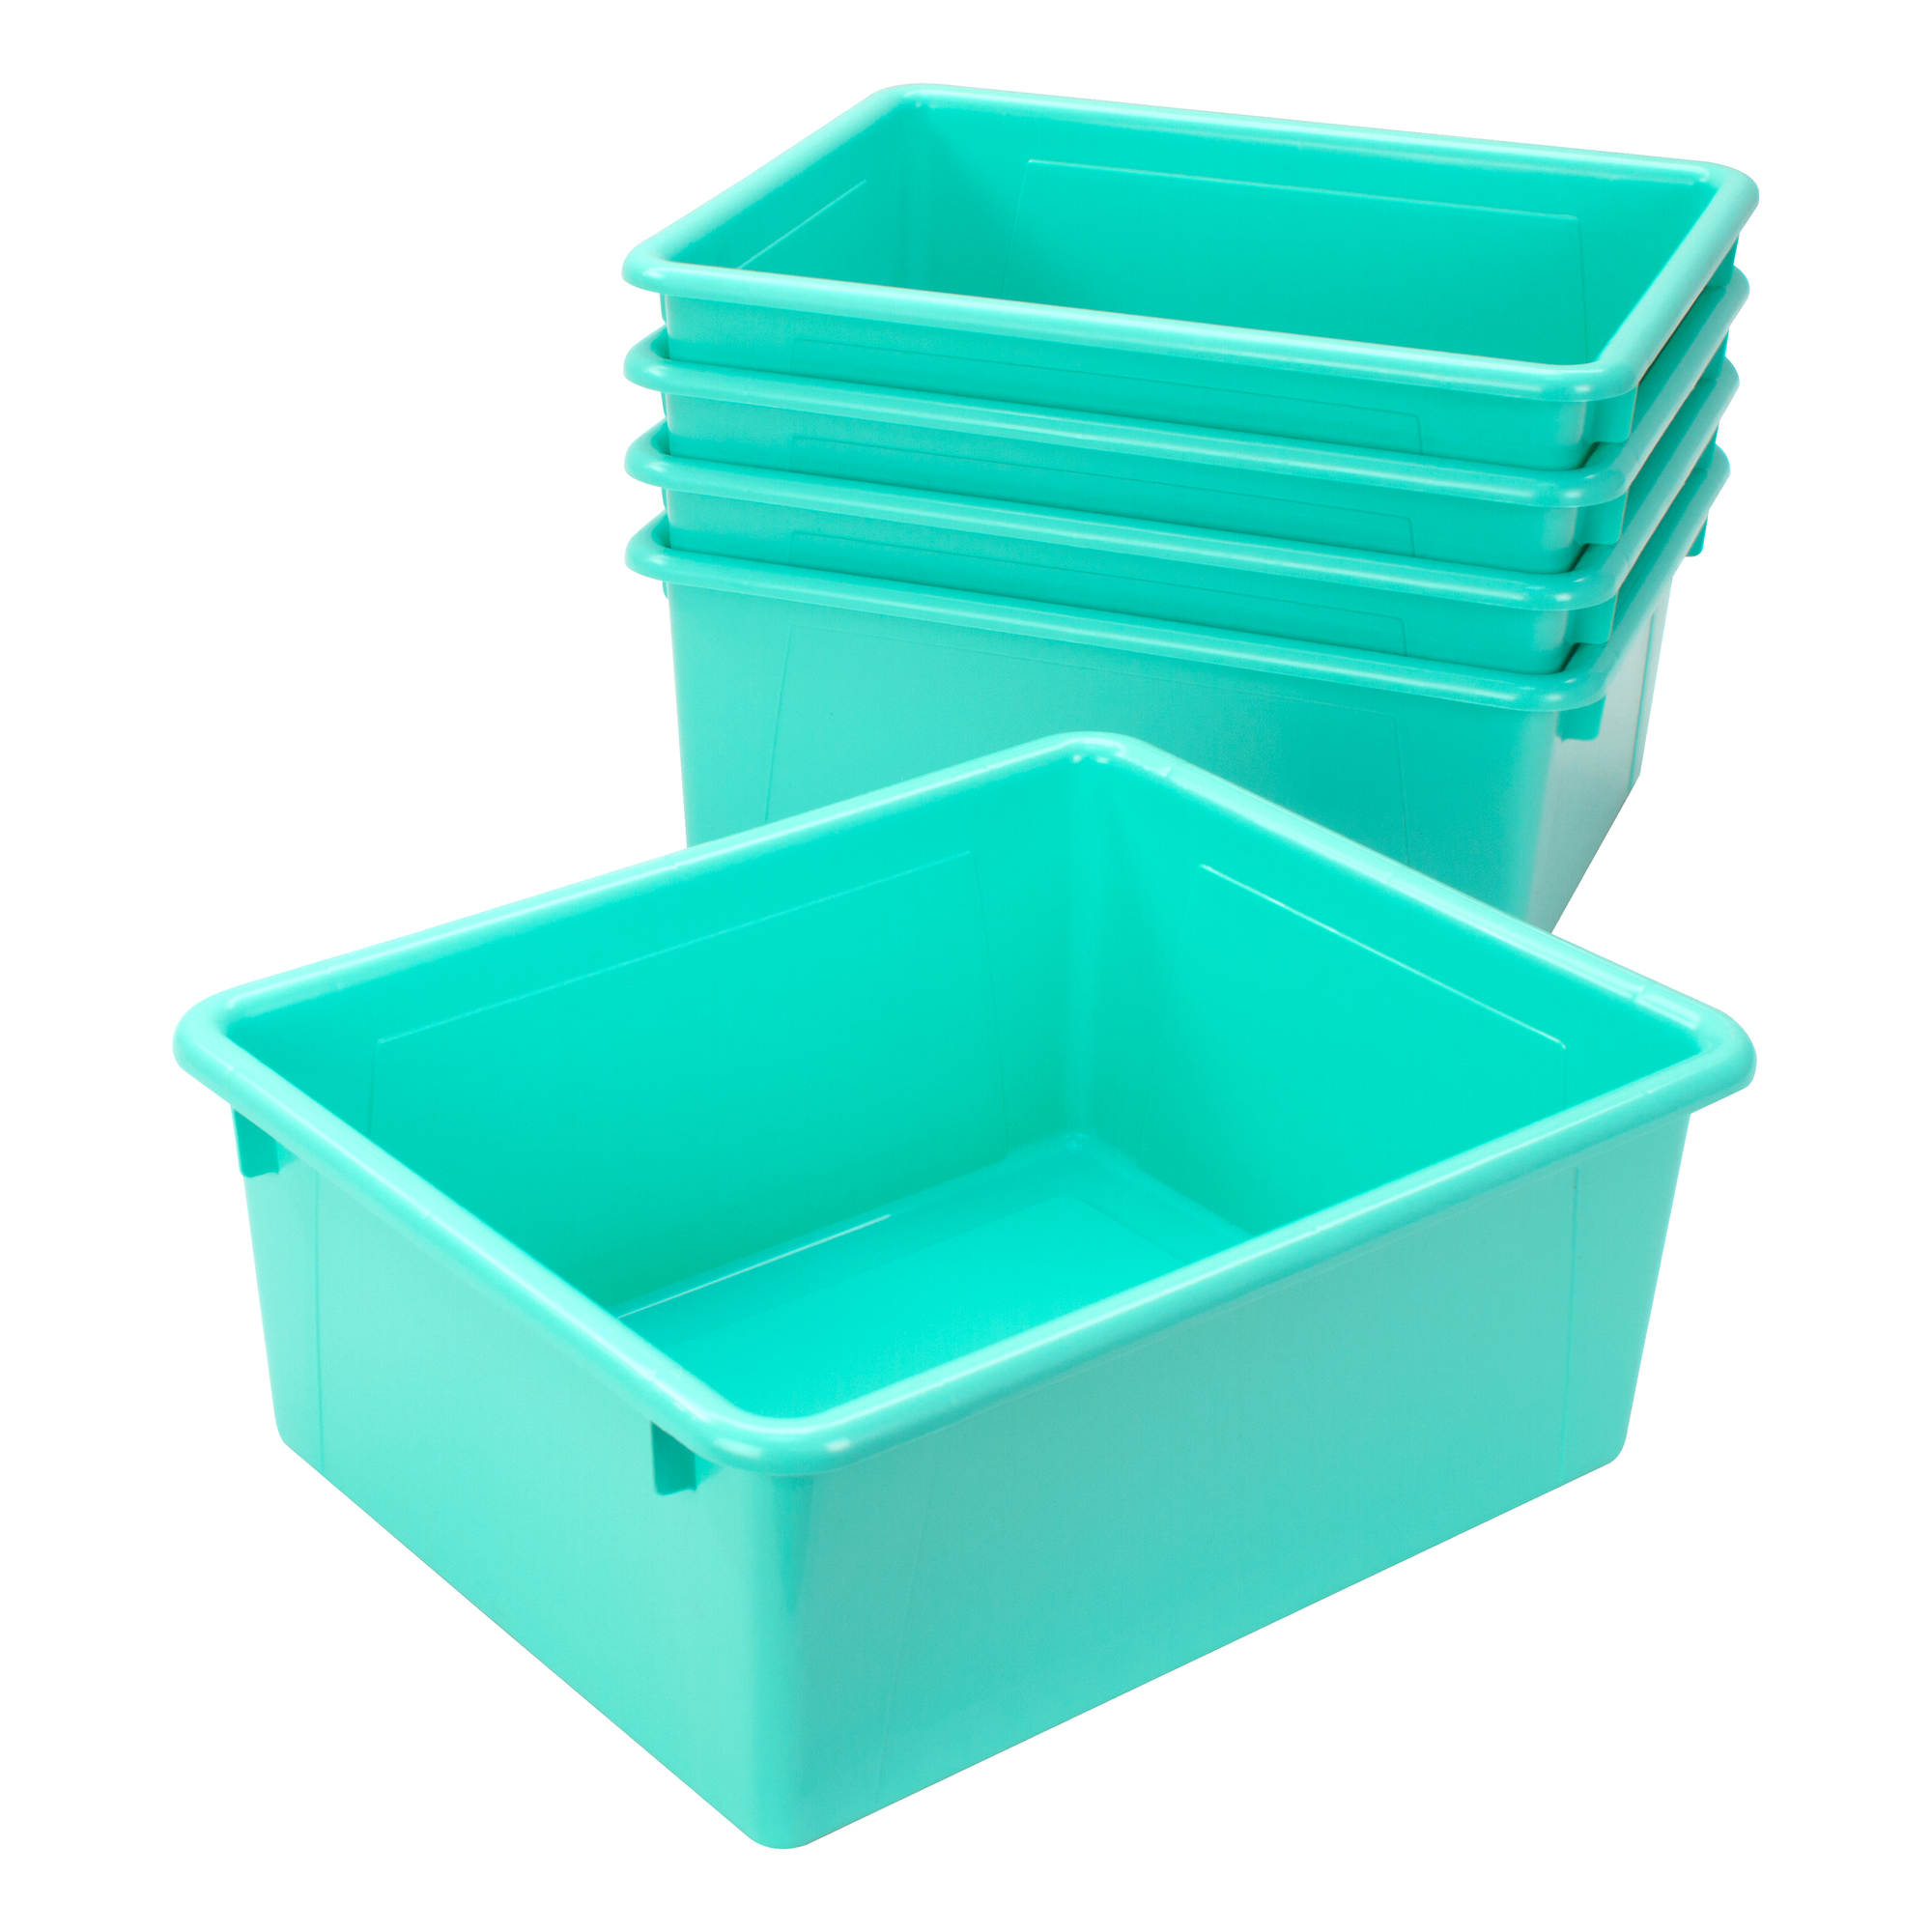 Storex Storage Tray, Letter Size, 10 x 13 x 5 Inches, Teal, 5-Pack